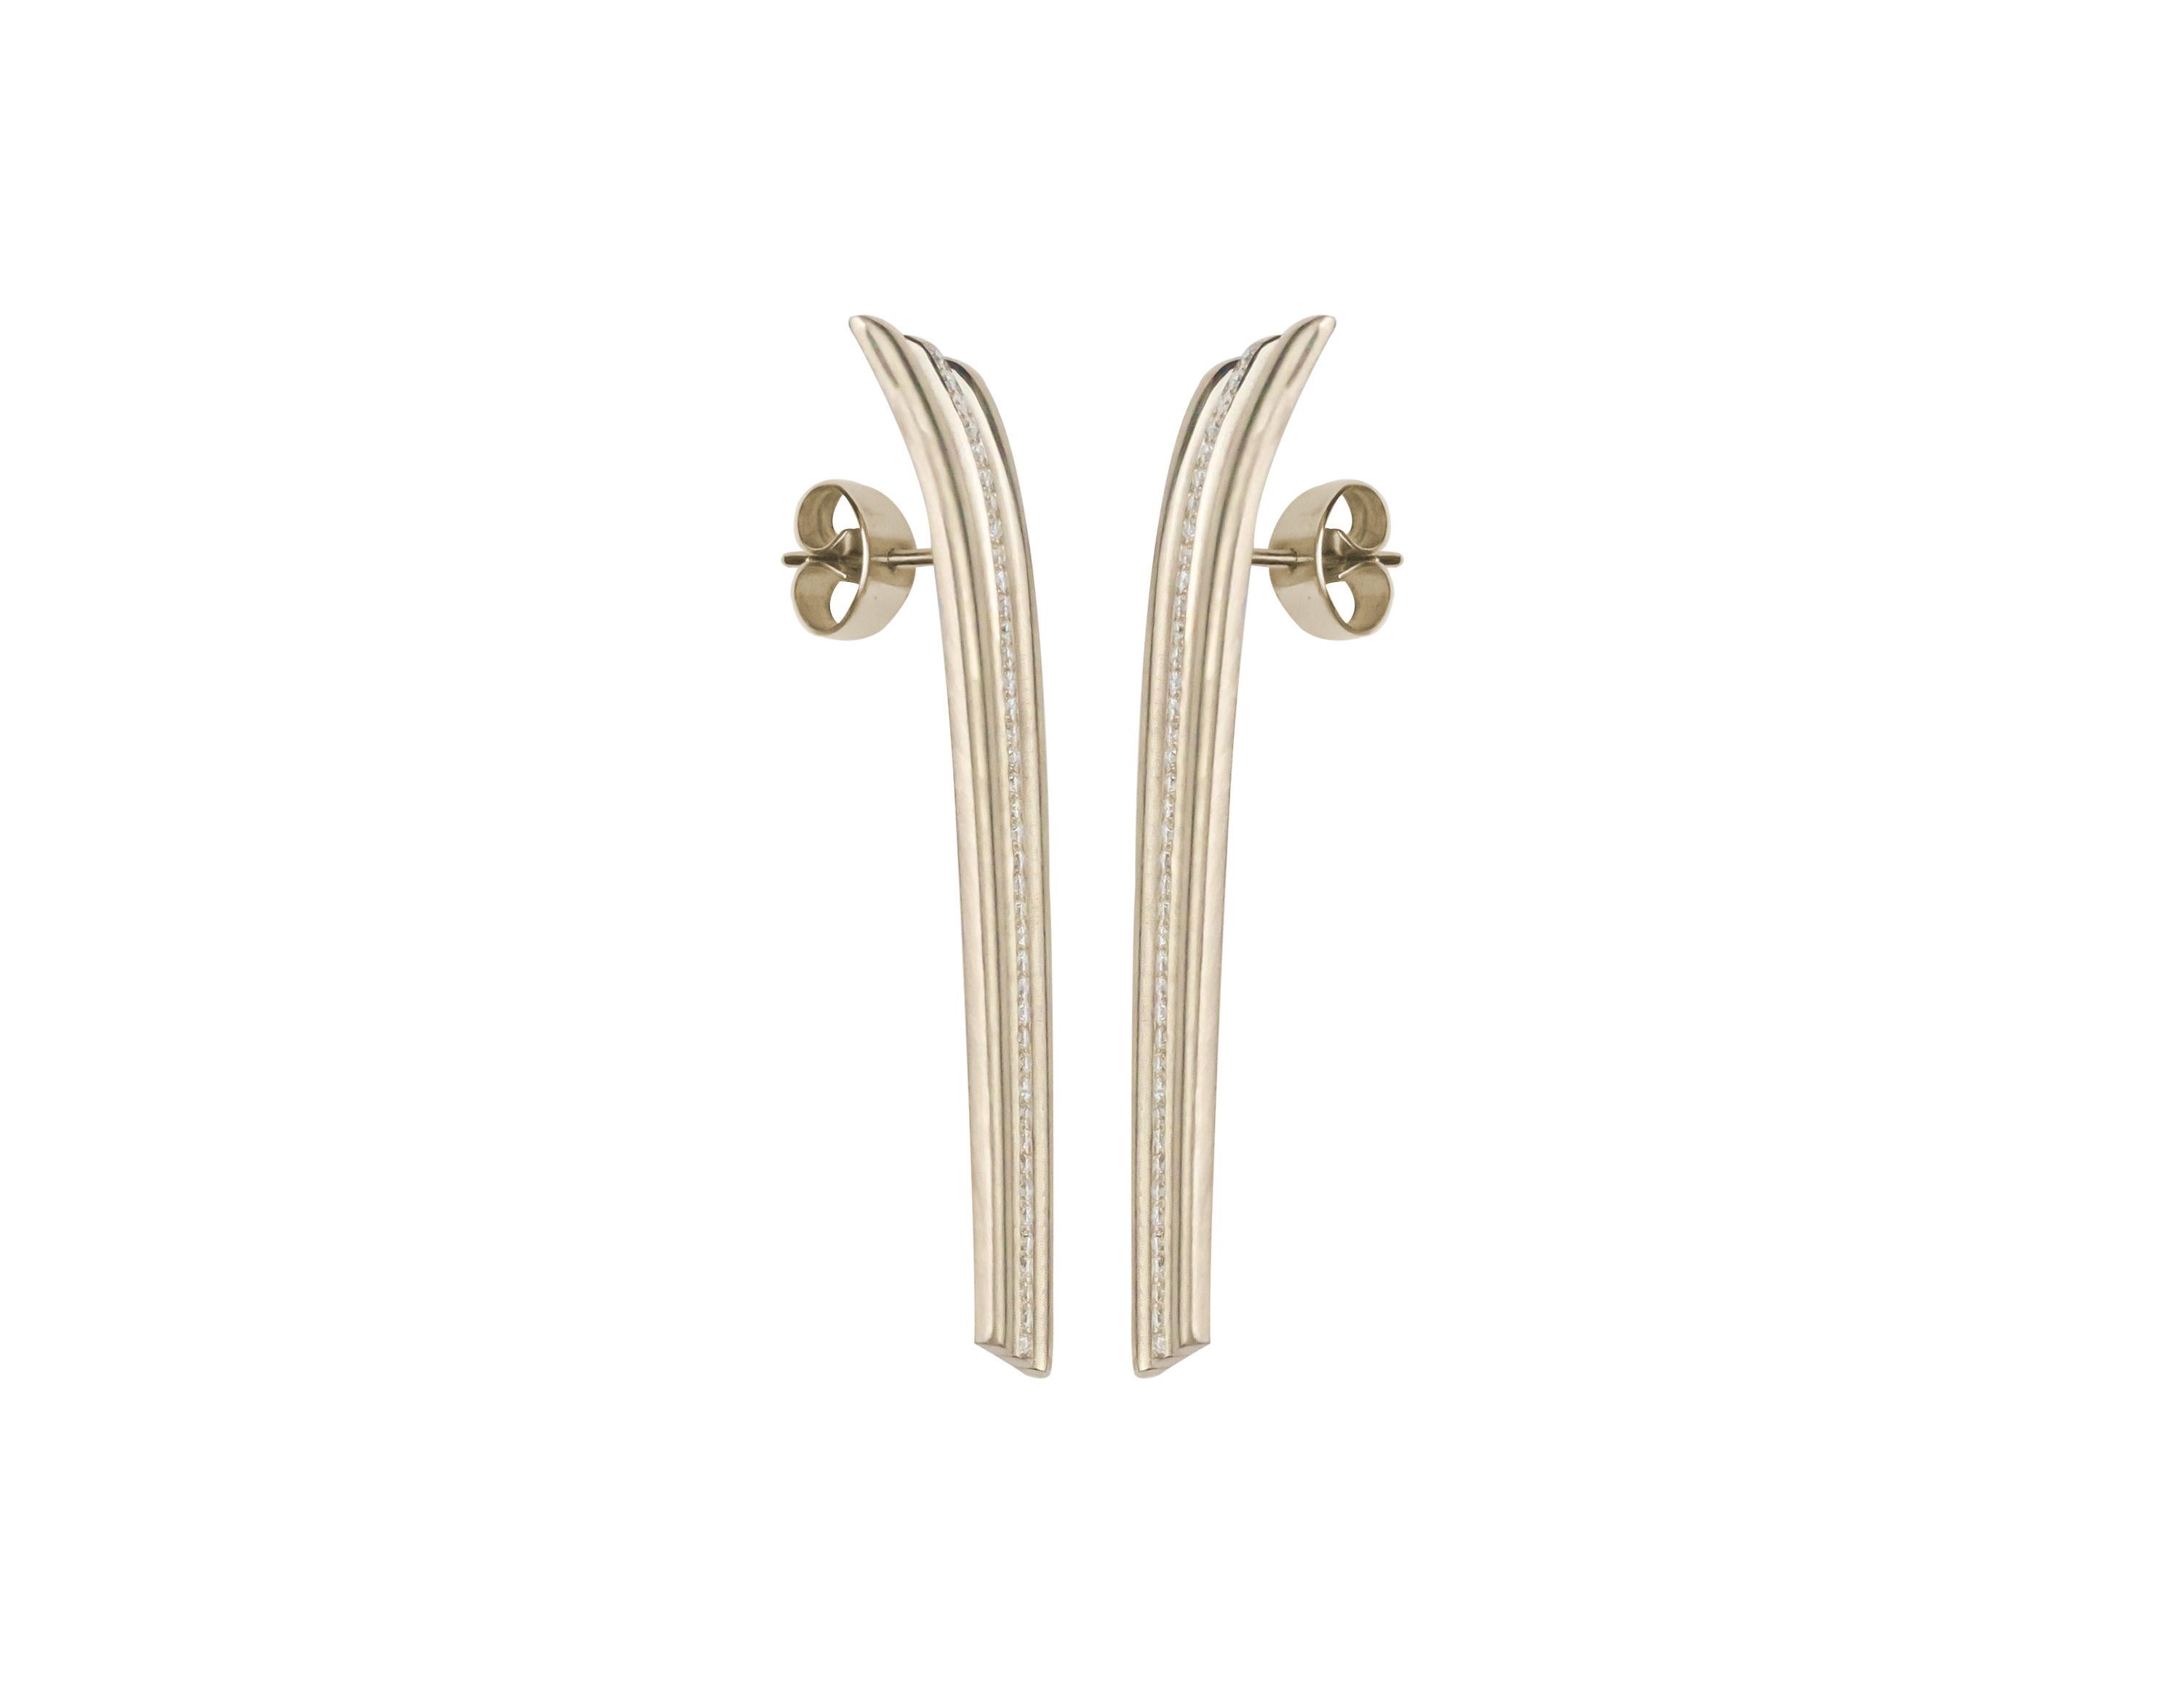 These earrings from POLINA ELLIS' MYCENAEAN collection are handcrafted in 18K raw white gold with 0,64ct white brilliant cut diamonds.
Length: 5,90cm
Width: 0,60-0,90cm